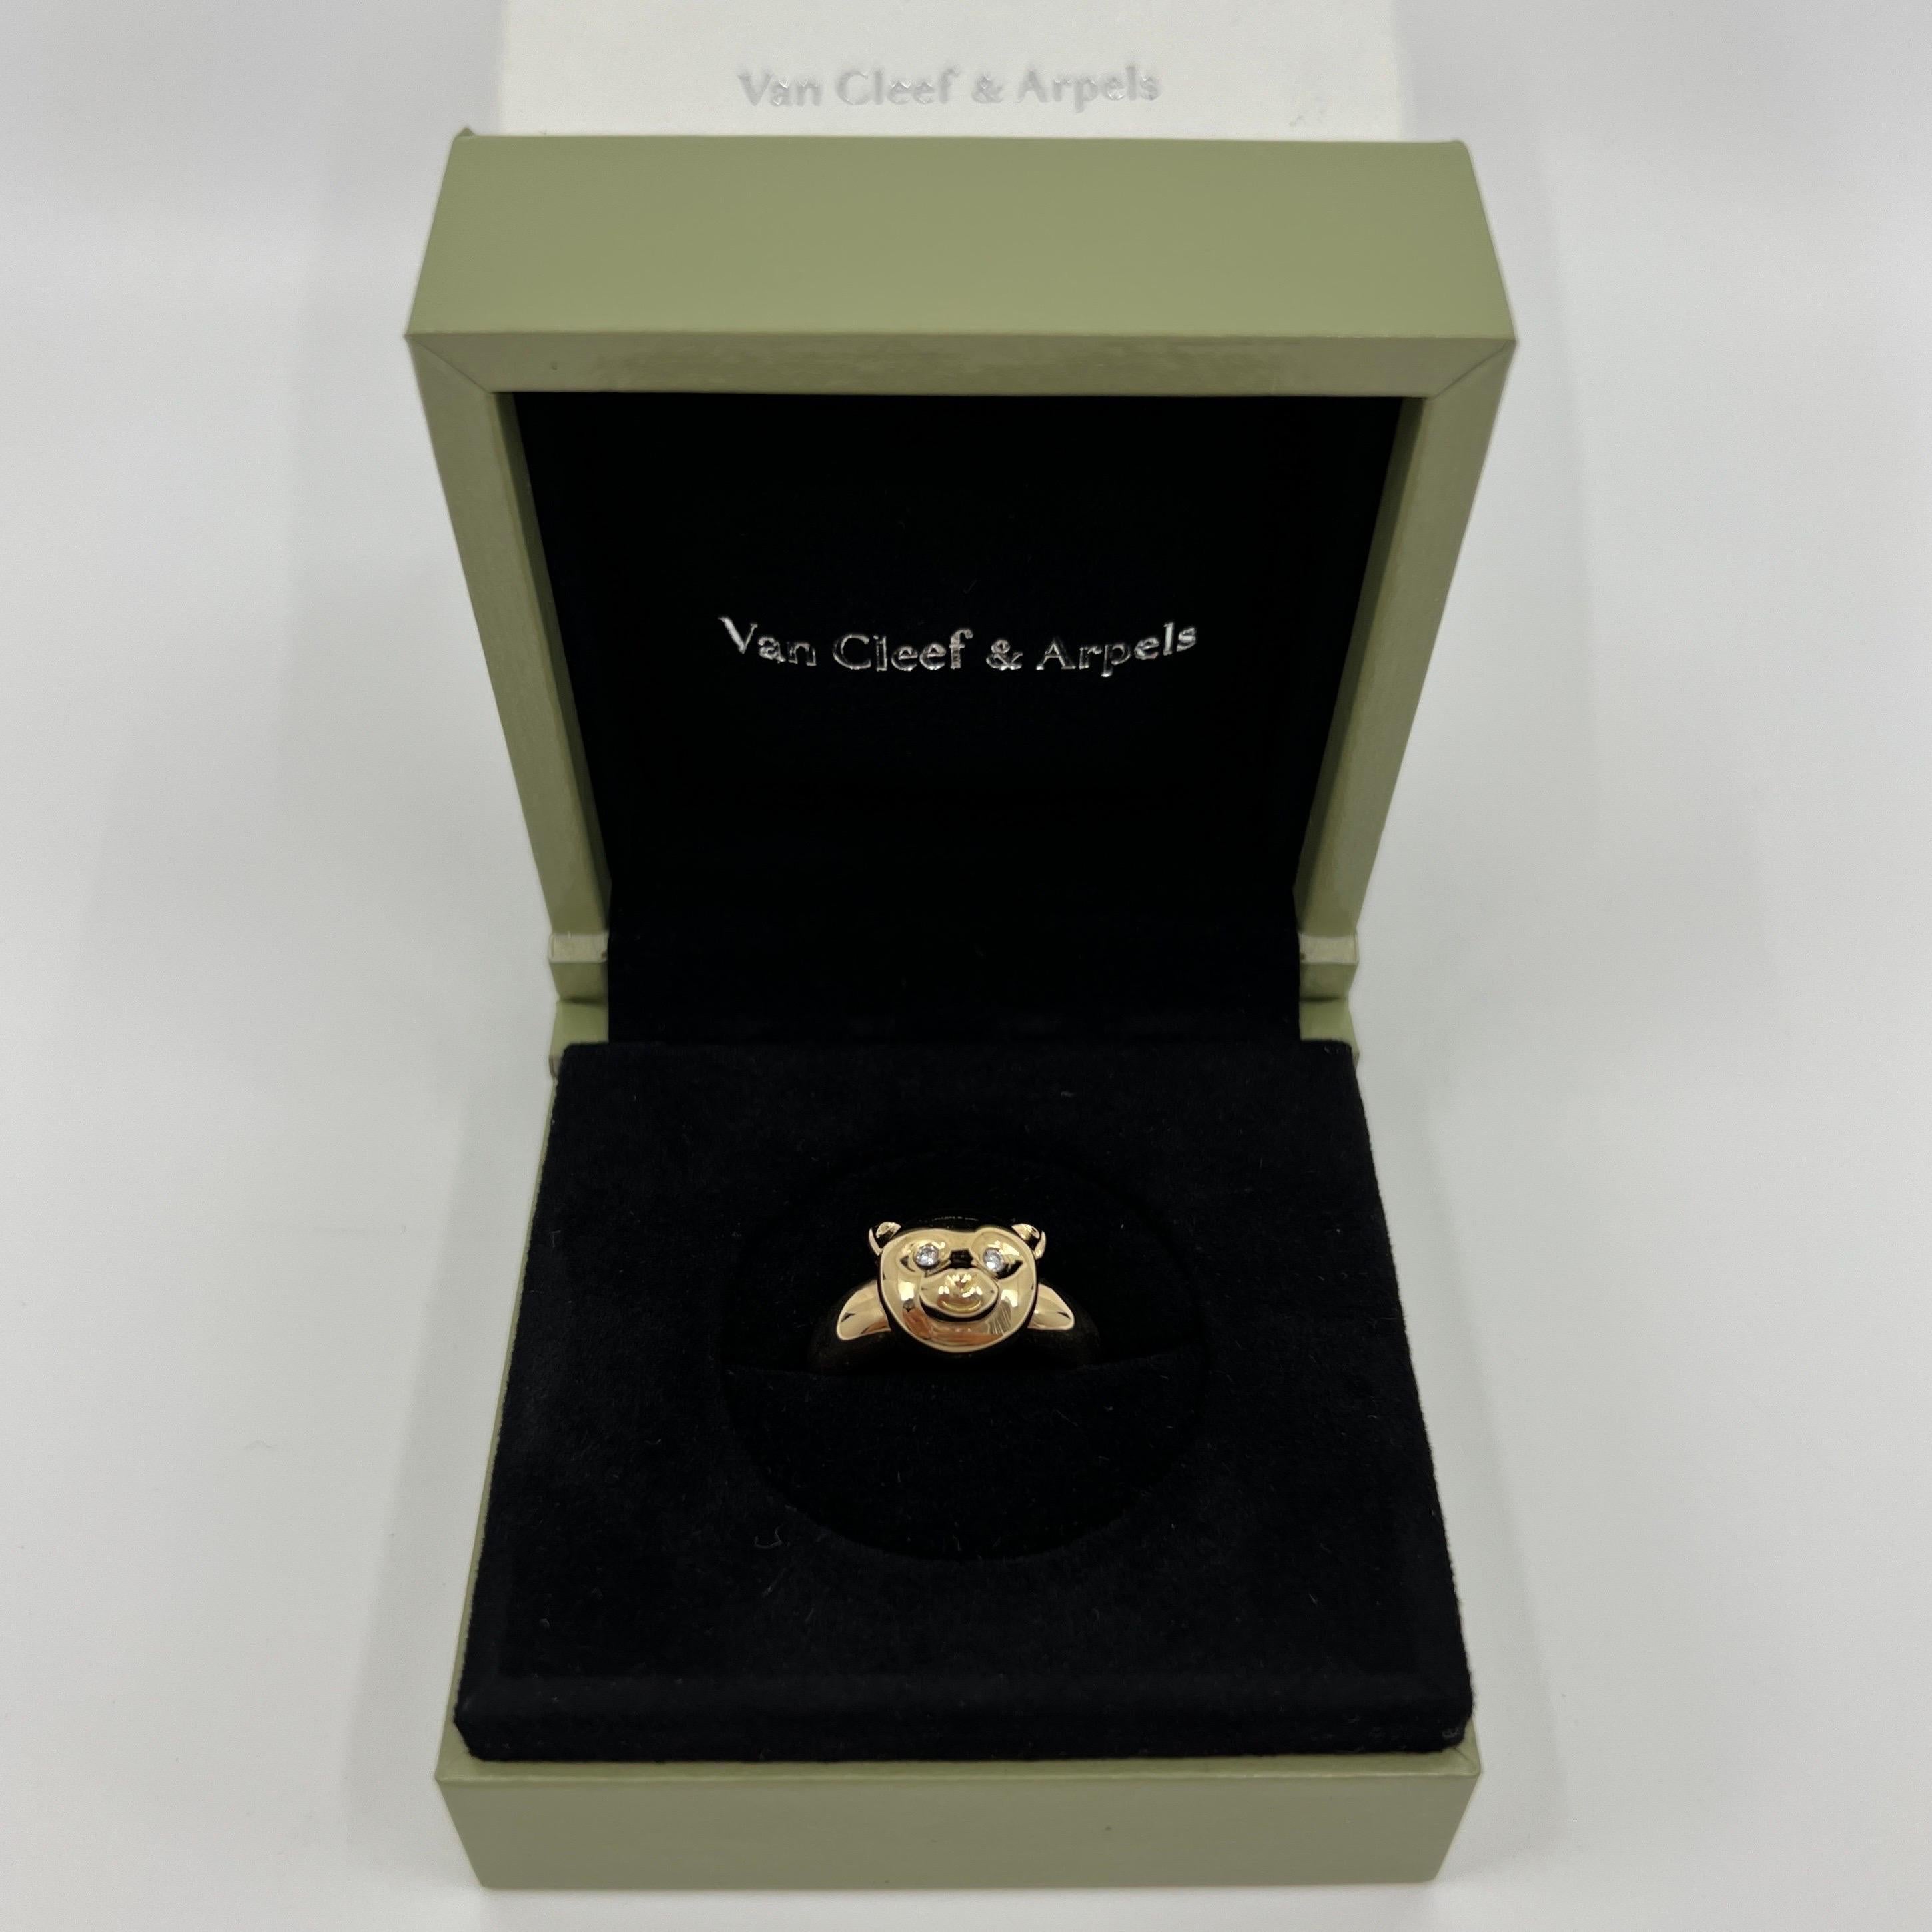 Very Rare Vintage Van Cleef & Arpels 18k Yellow Gold Teddy Bear Ring and Pendant 3